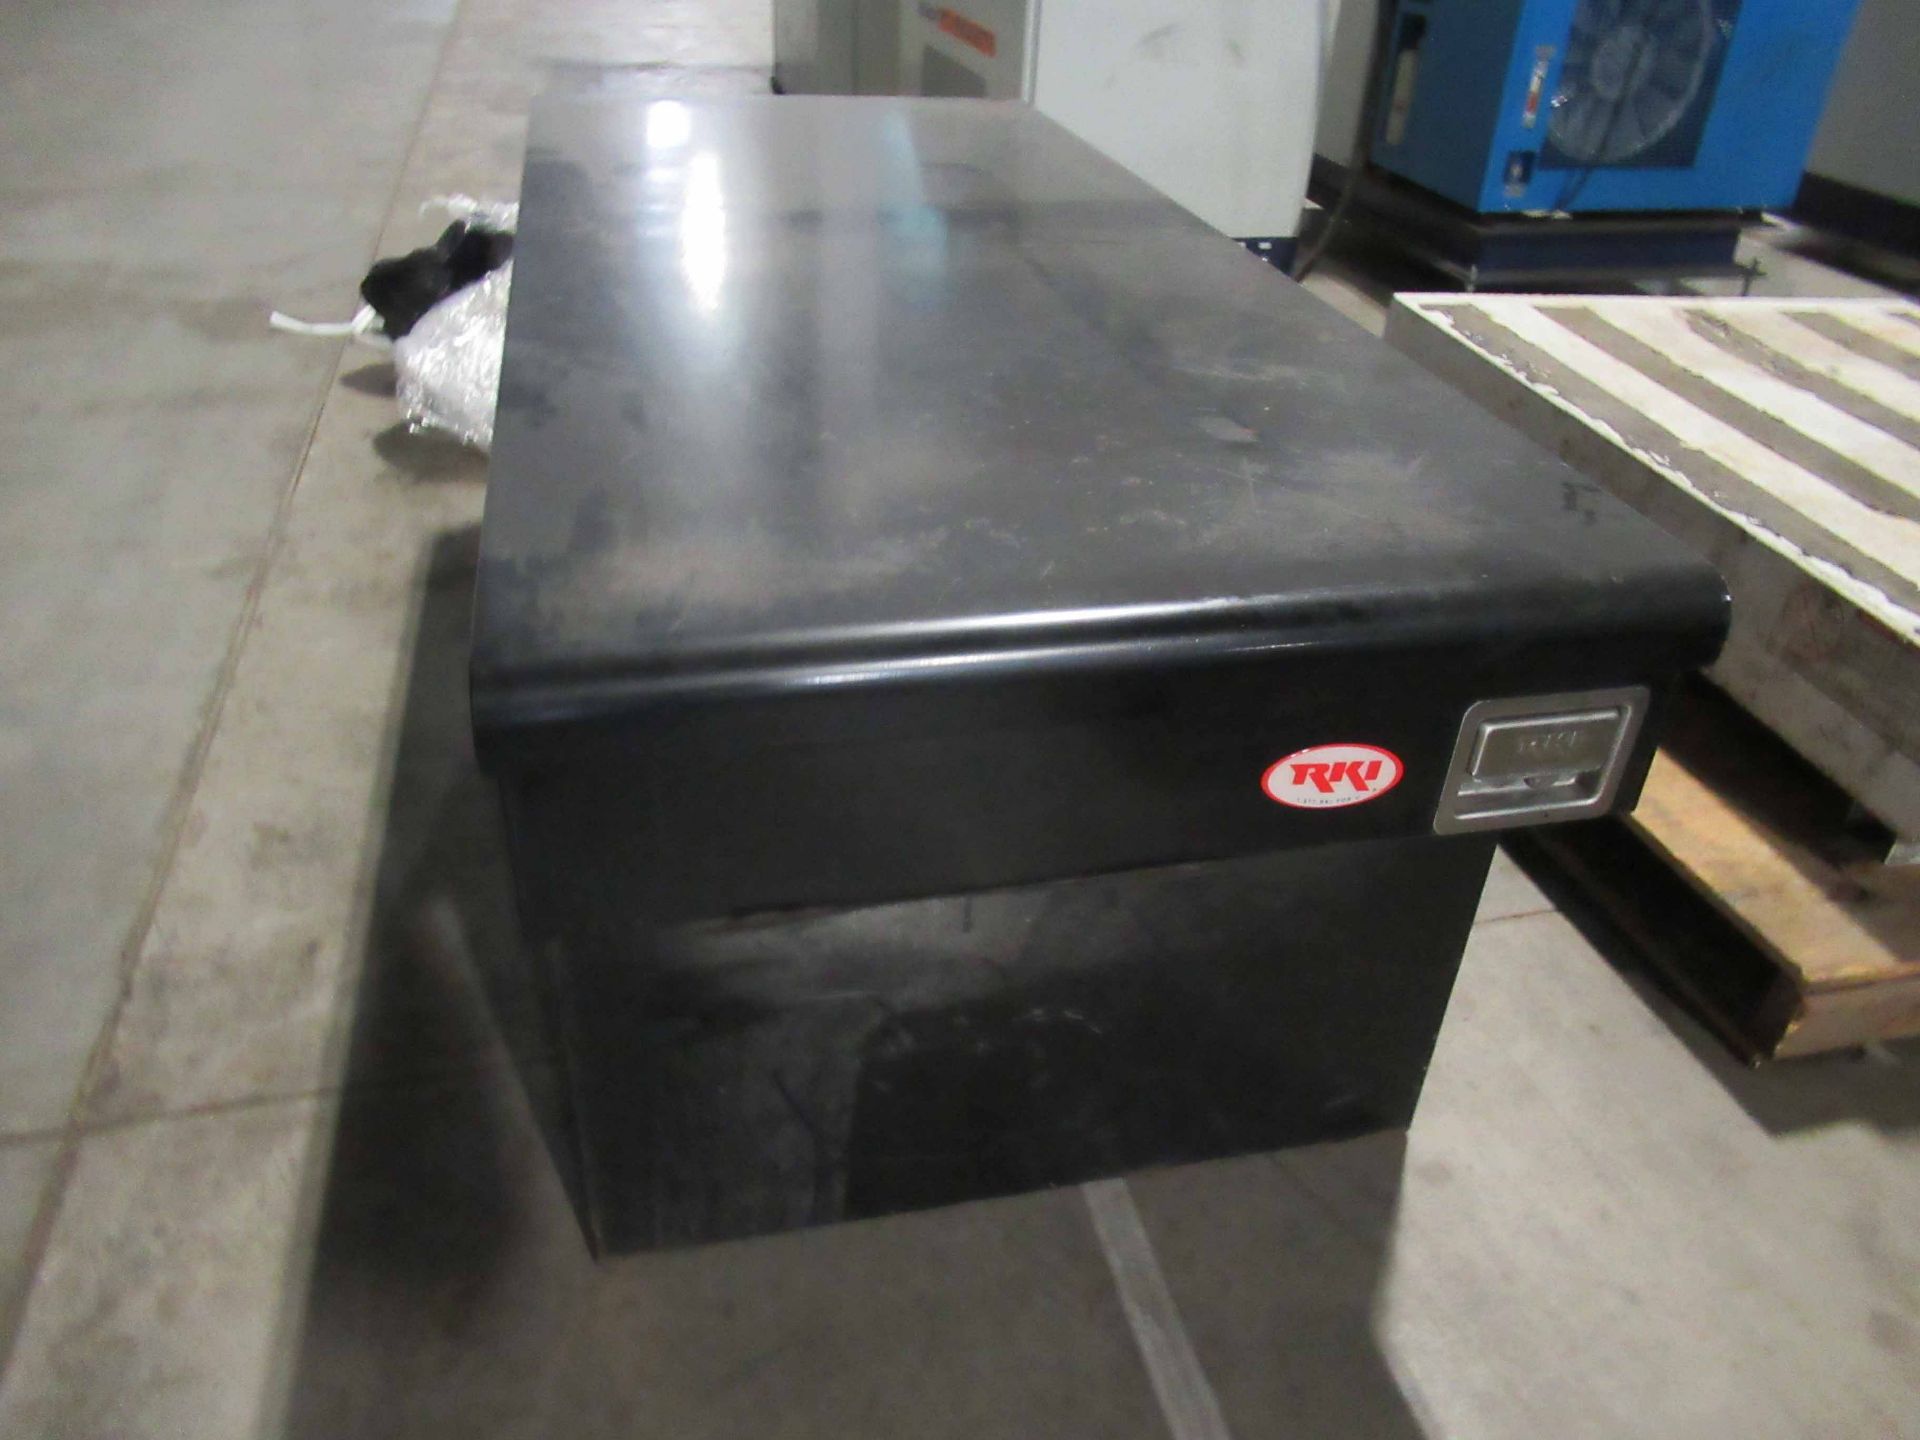 LOT CONSISTING OF: (4) COMMERCIAL GRADE TOOLBOXES, RKI, 71.25" overall length; PORTABLE TOOLBOX, - Image 5 of 6